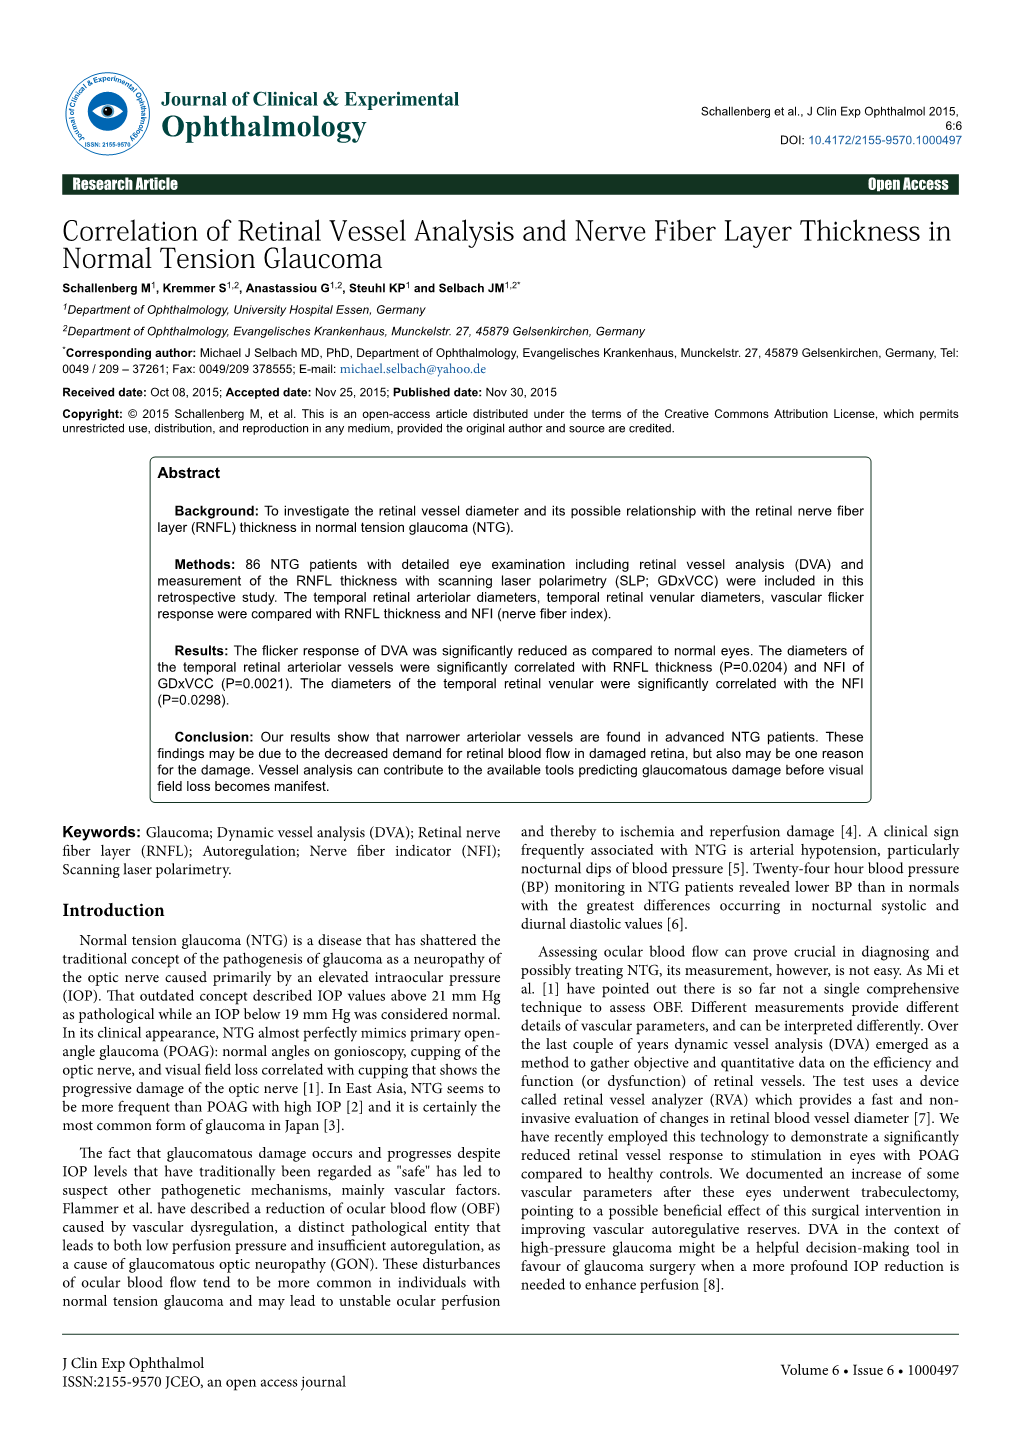 Correlation of Retinal Vessel Analysis and Nerve Fiber Layer Thickness In